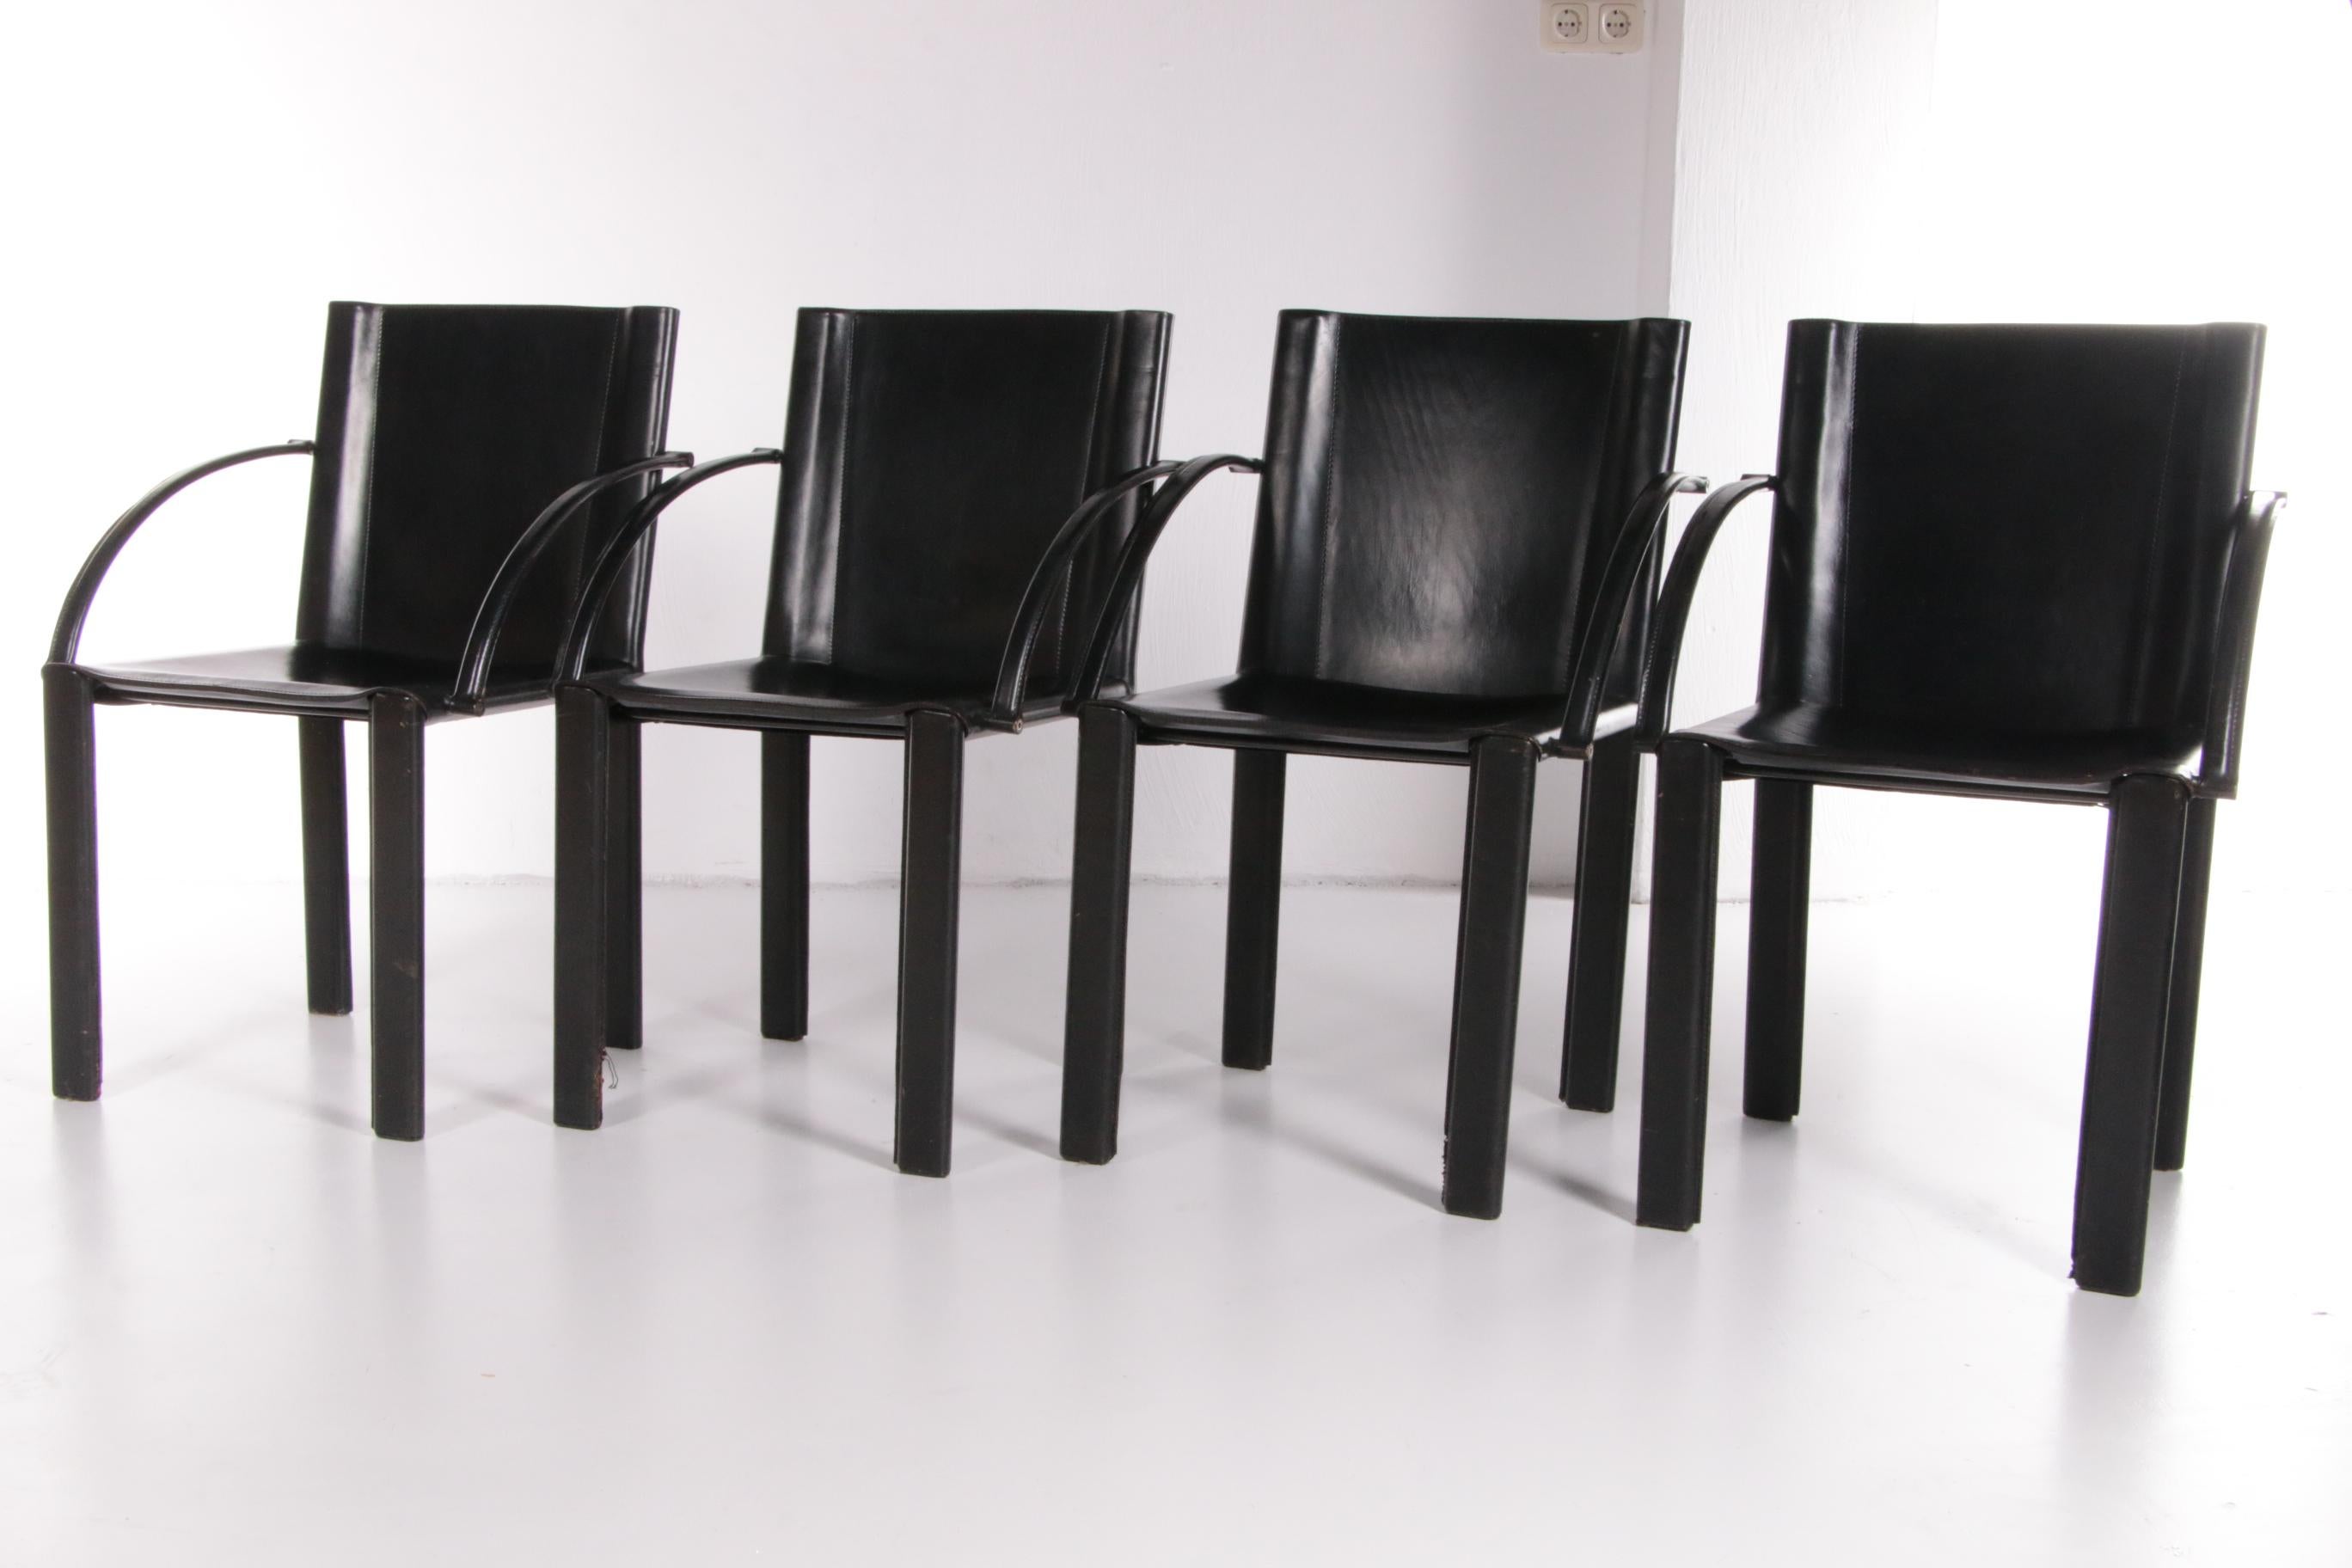 Late 20th Century Set of 4 Coral Dining Room Chairs by Carlo Bartoli for Matteo Grassi, 1980s